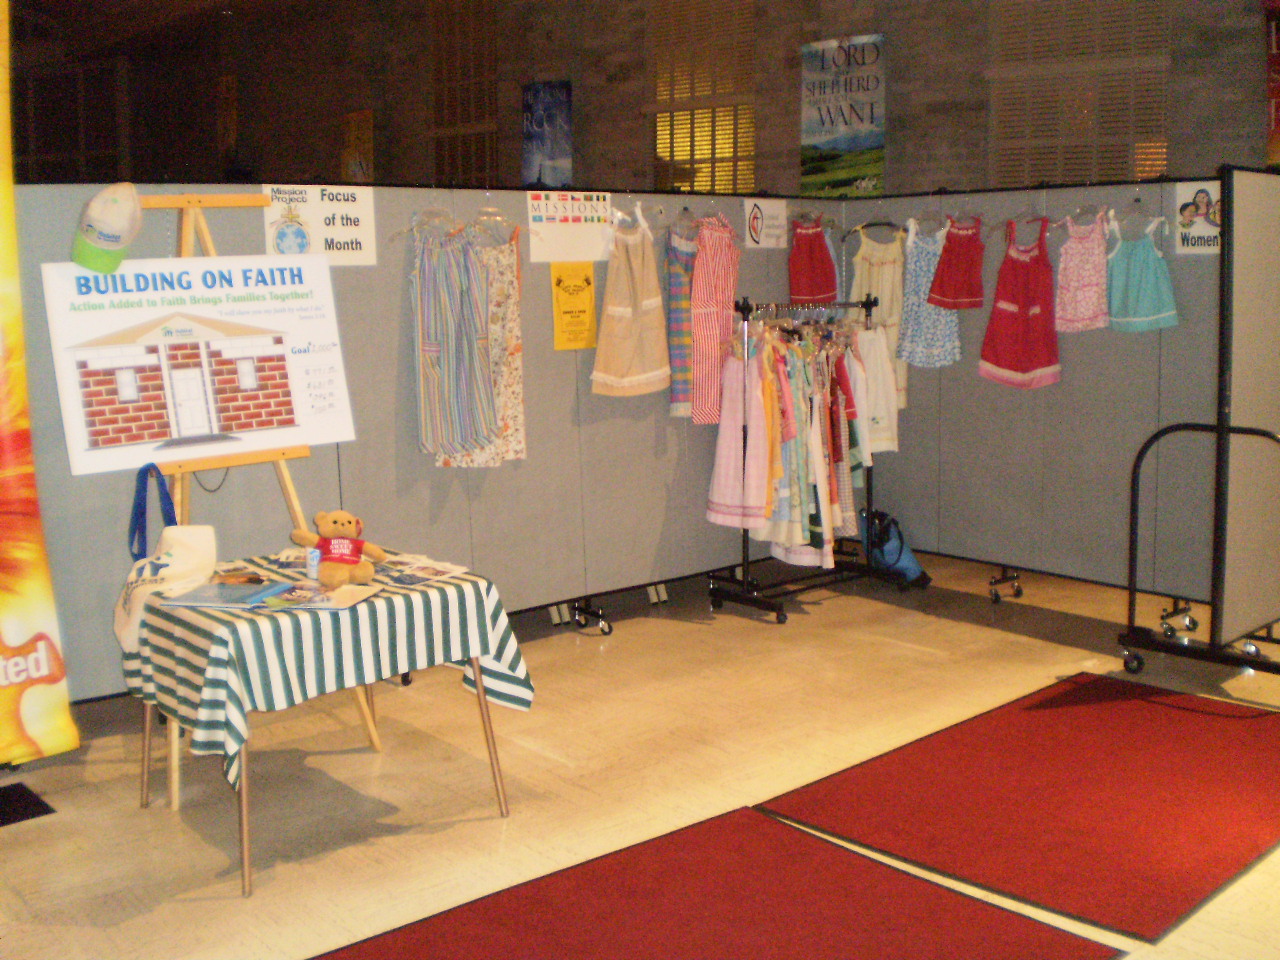 Female dresses are displayed on and around a Screenflex Room Divider in the back of a church entrance